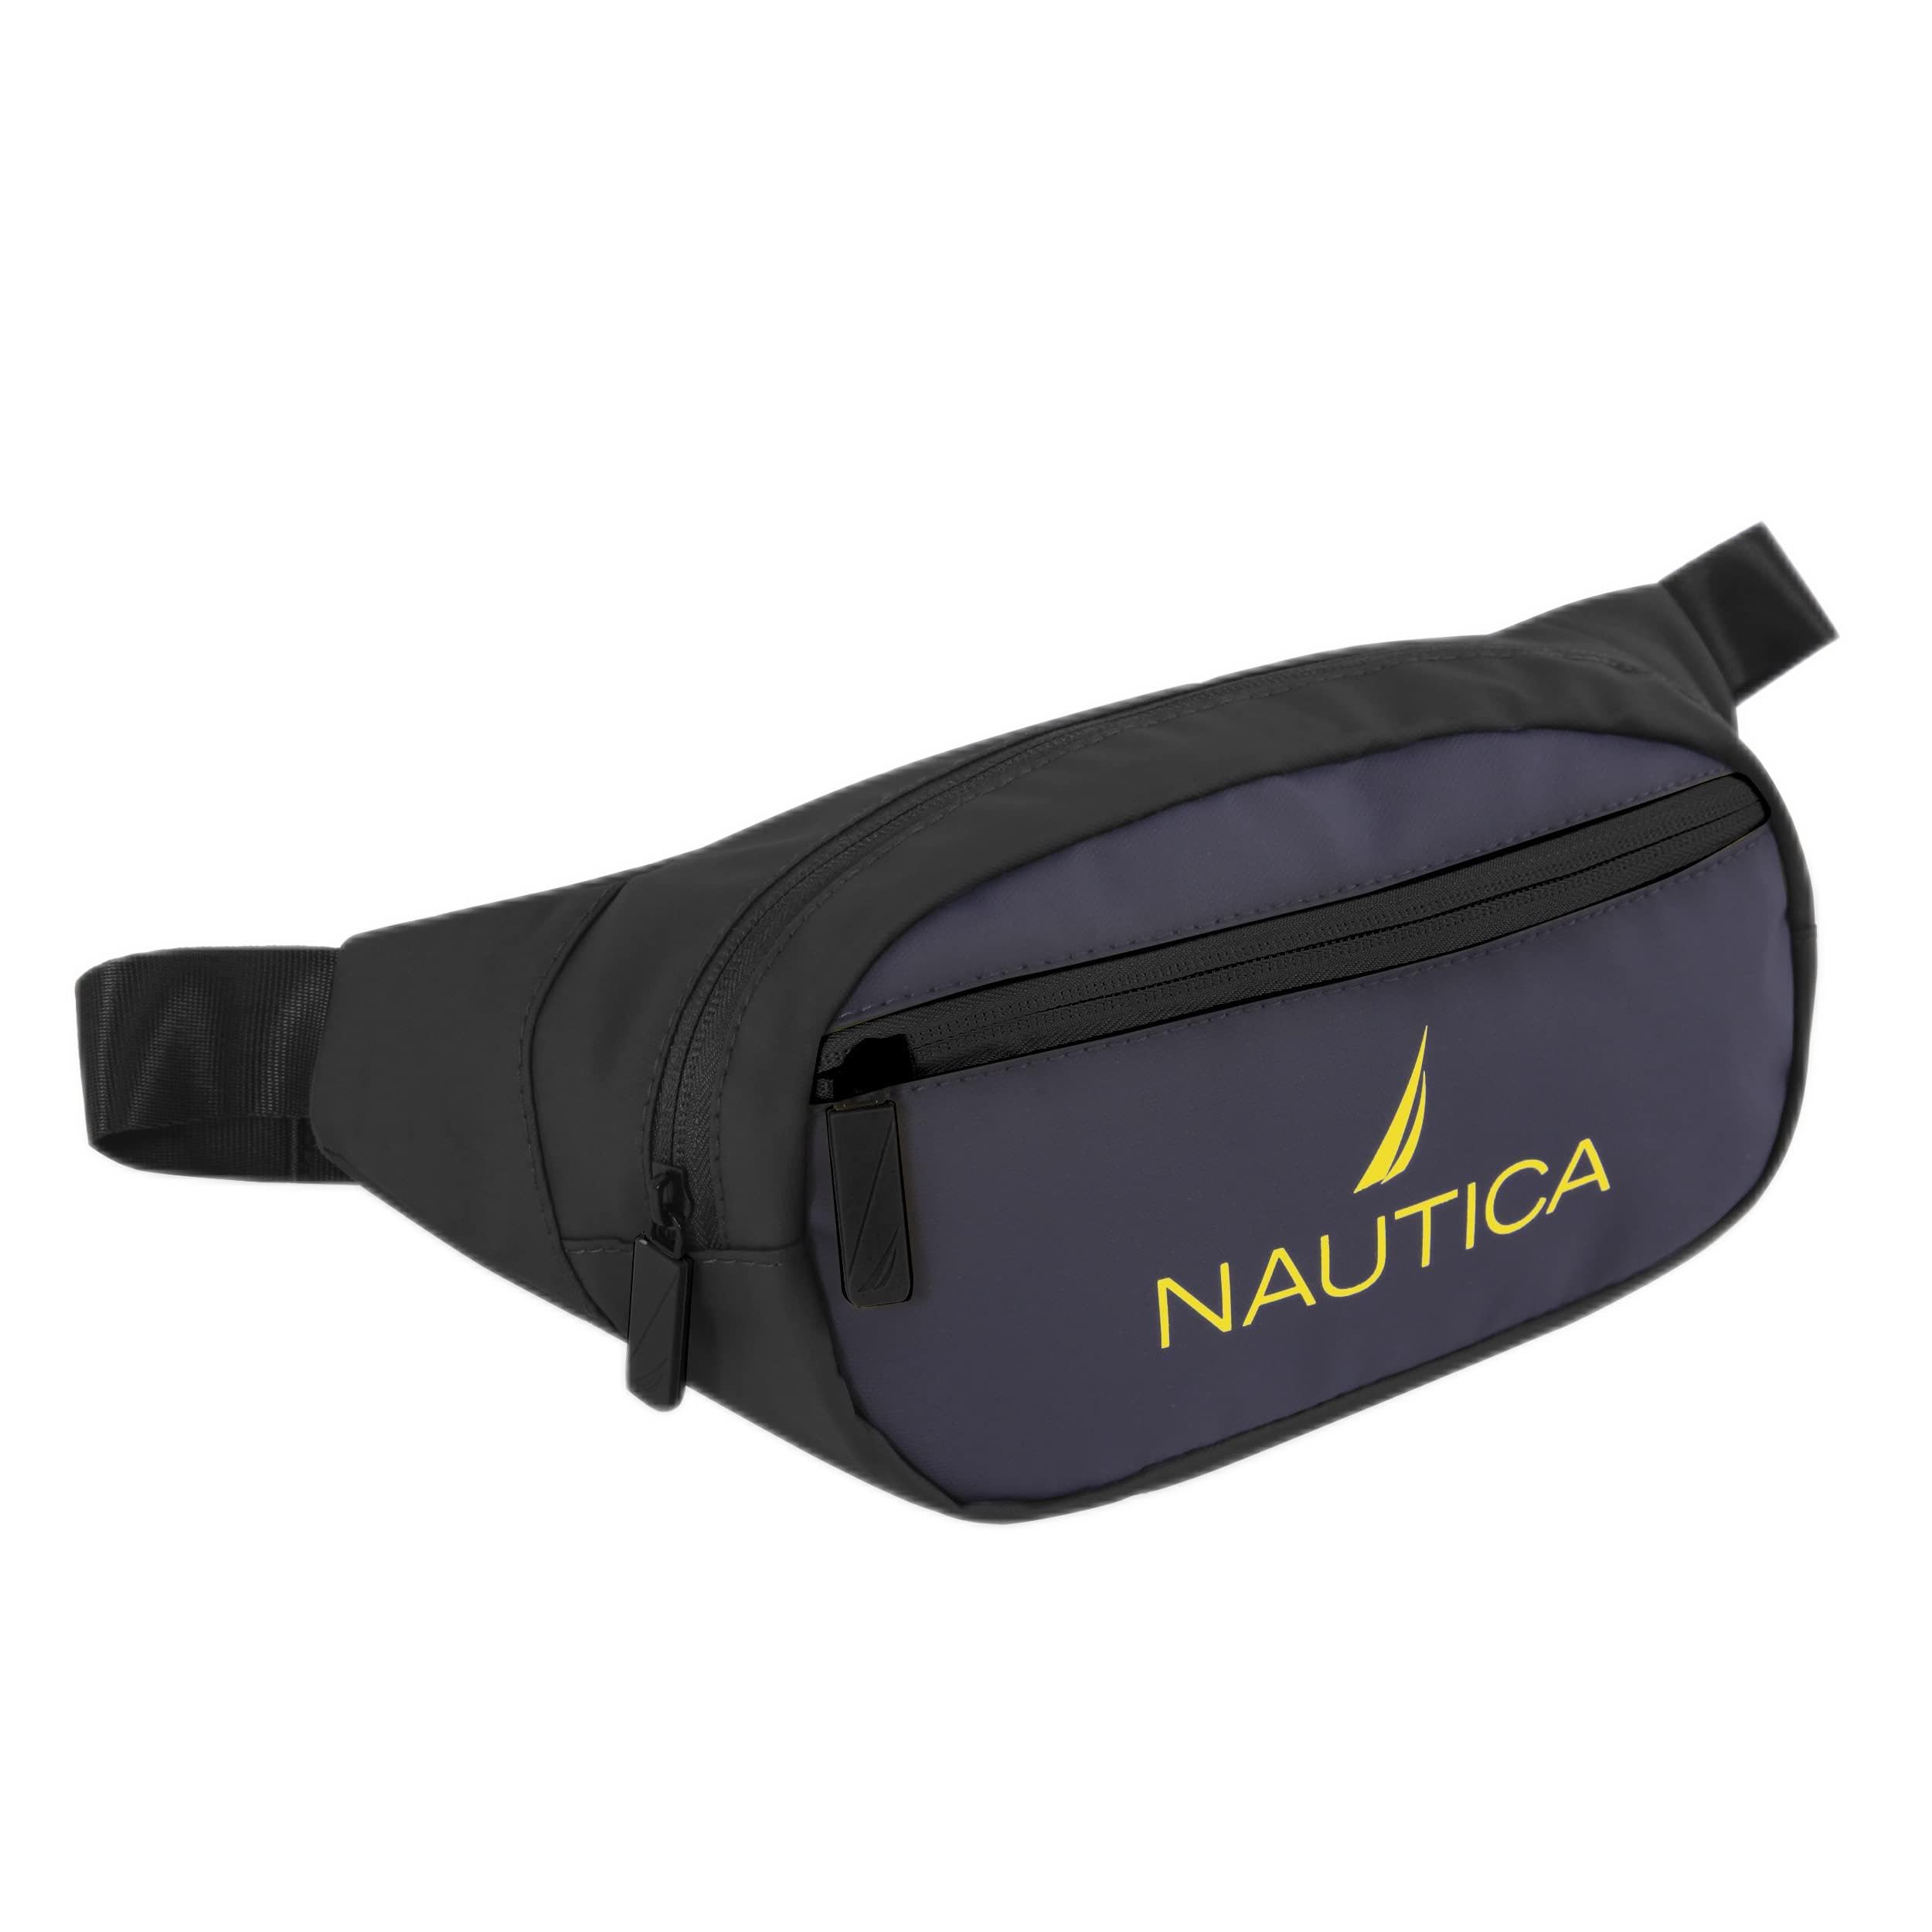 NAUTICA Fanny Pack, Black Navy, One Size